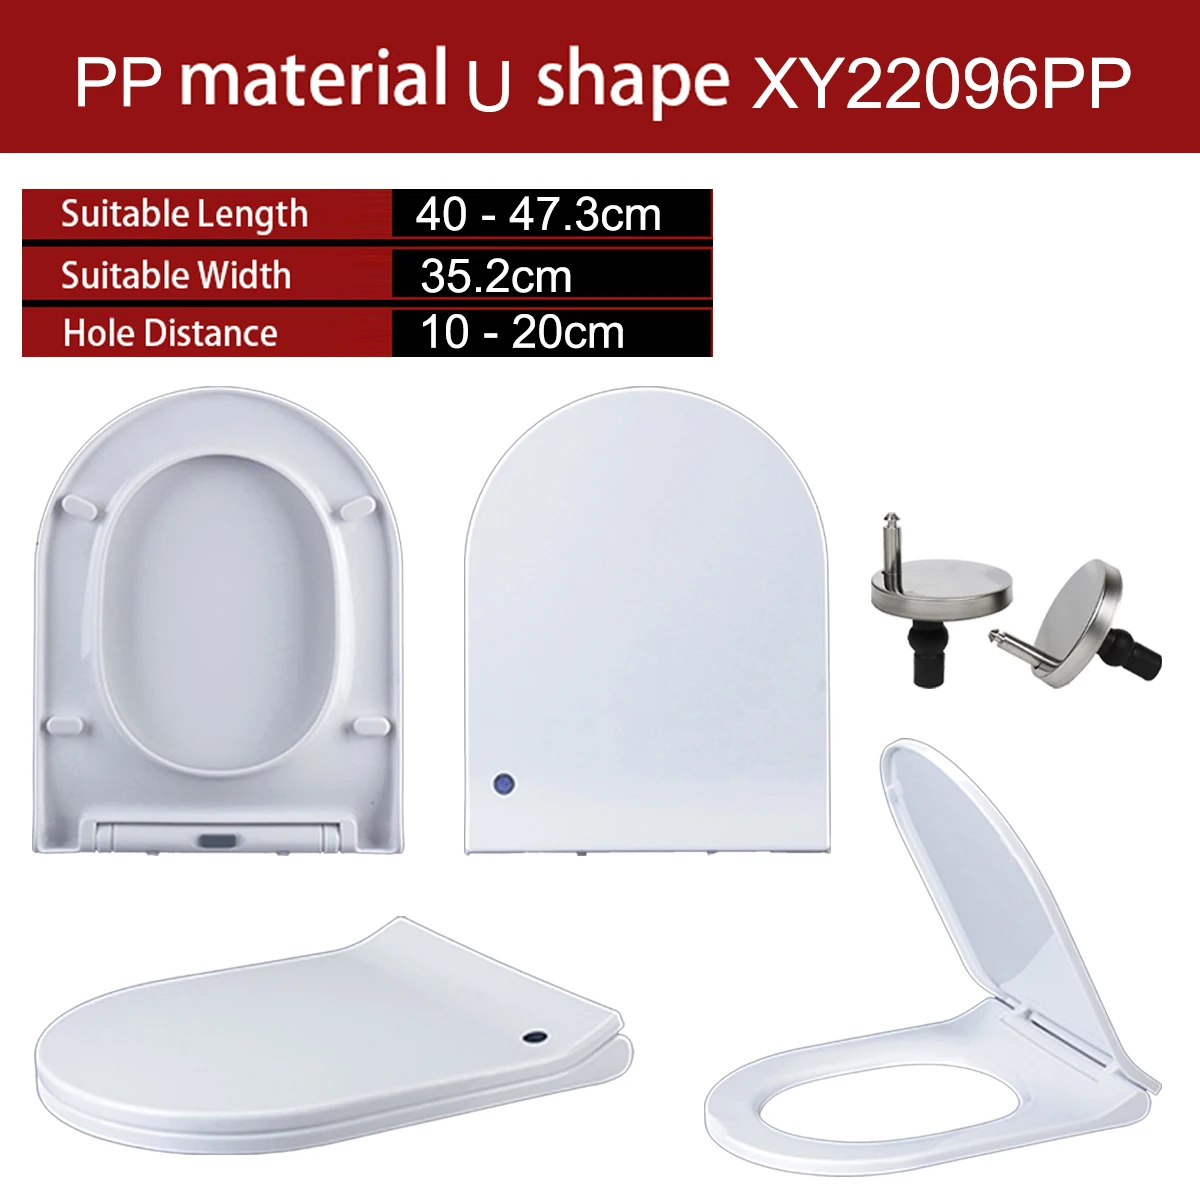 

Universal U Shape Elongated Slow Close WC Toilet Seats Cover Bowl Lid Top Mounted Quick Release PP Board Soft Closure XY22096PP